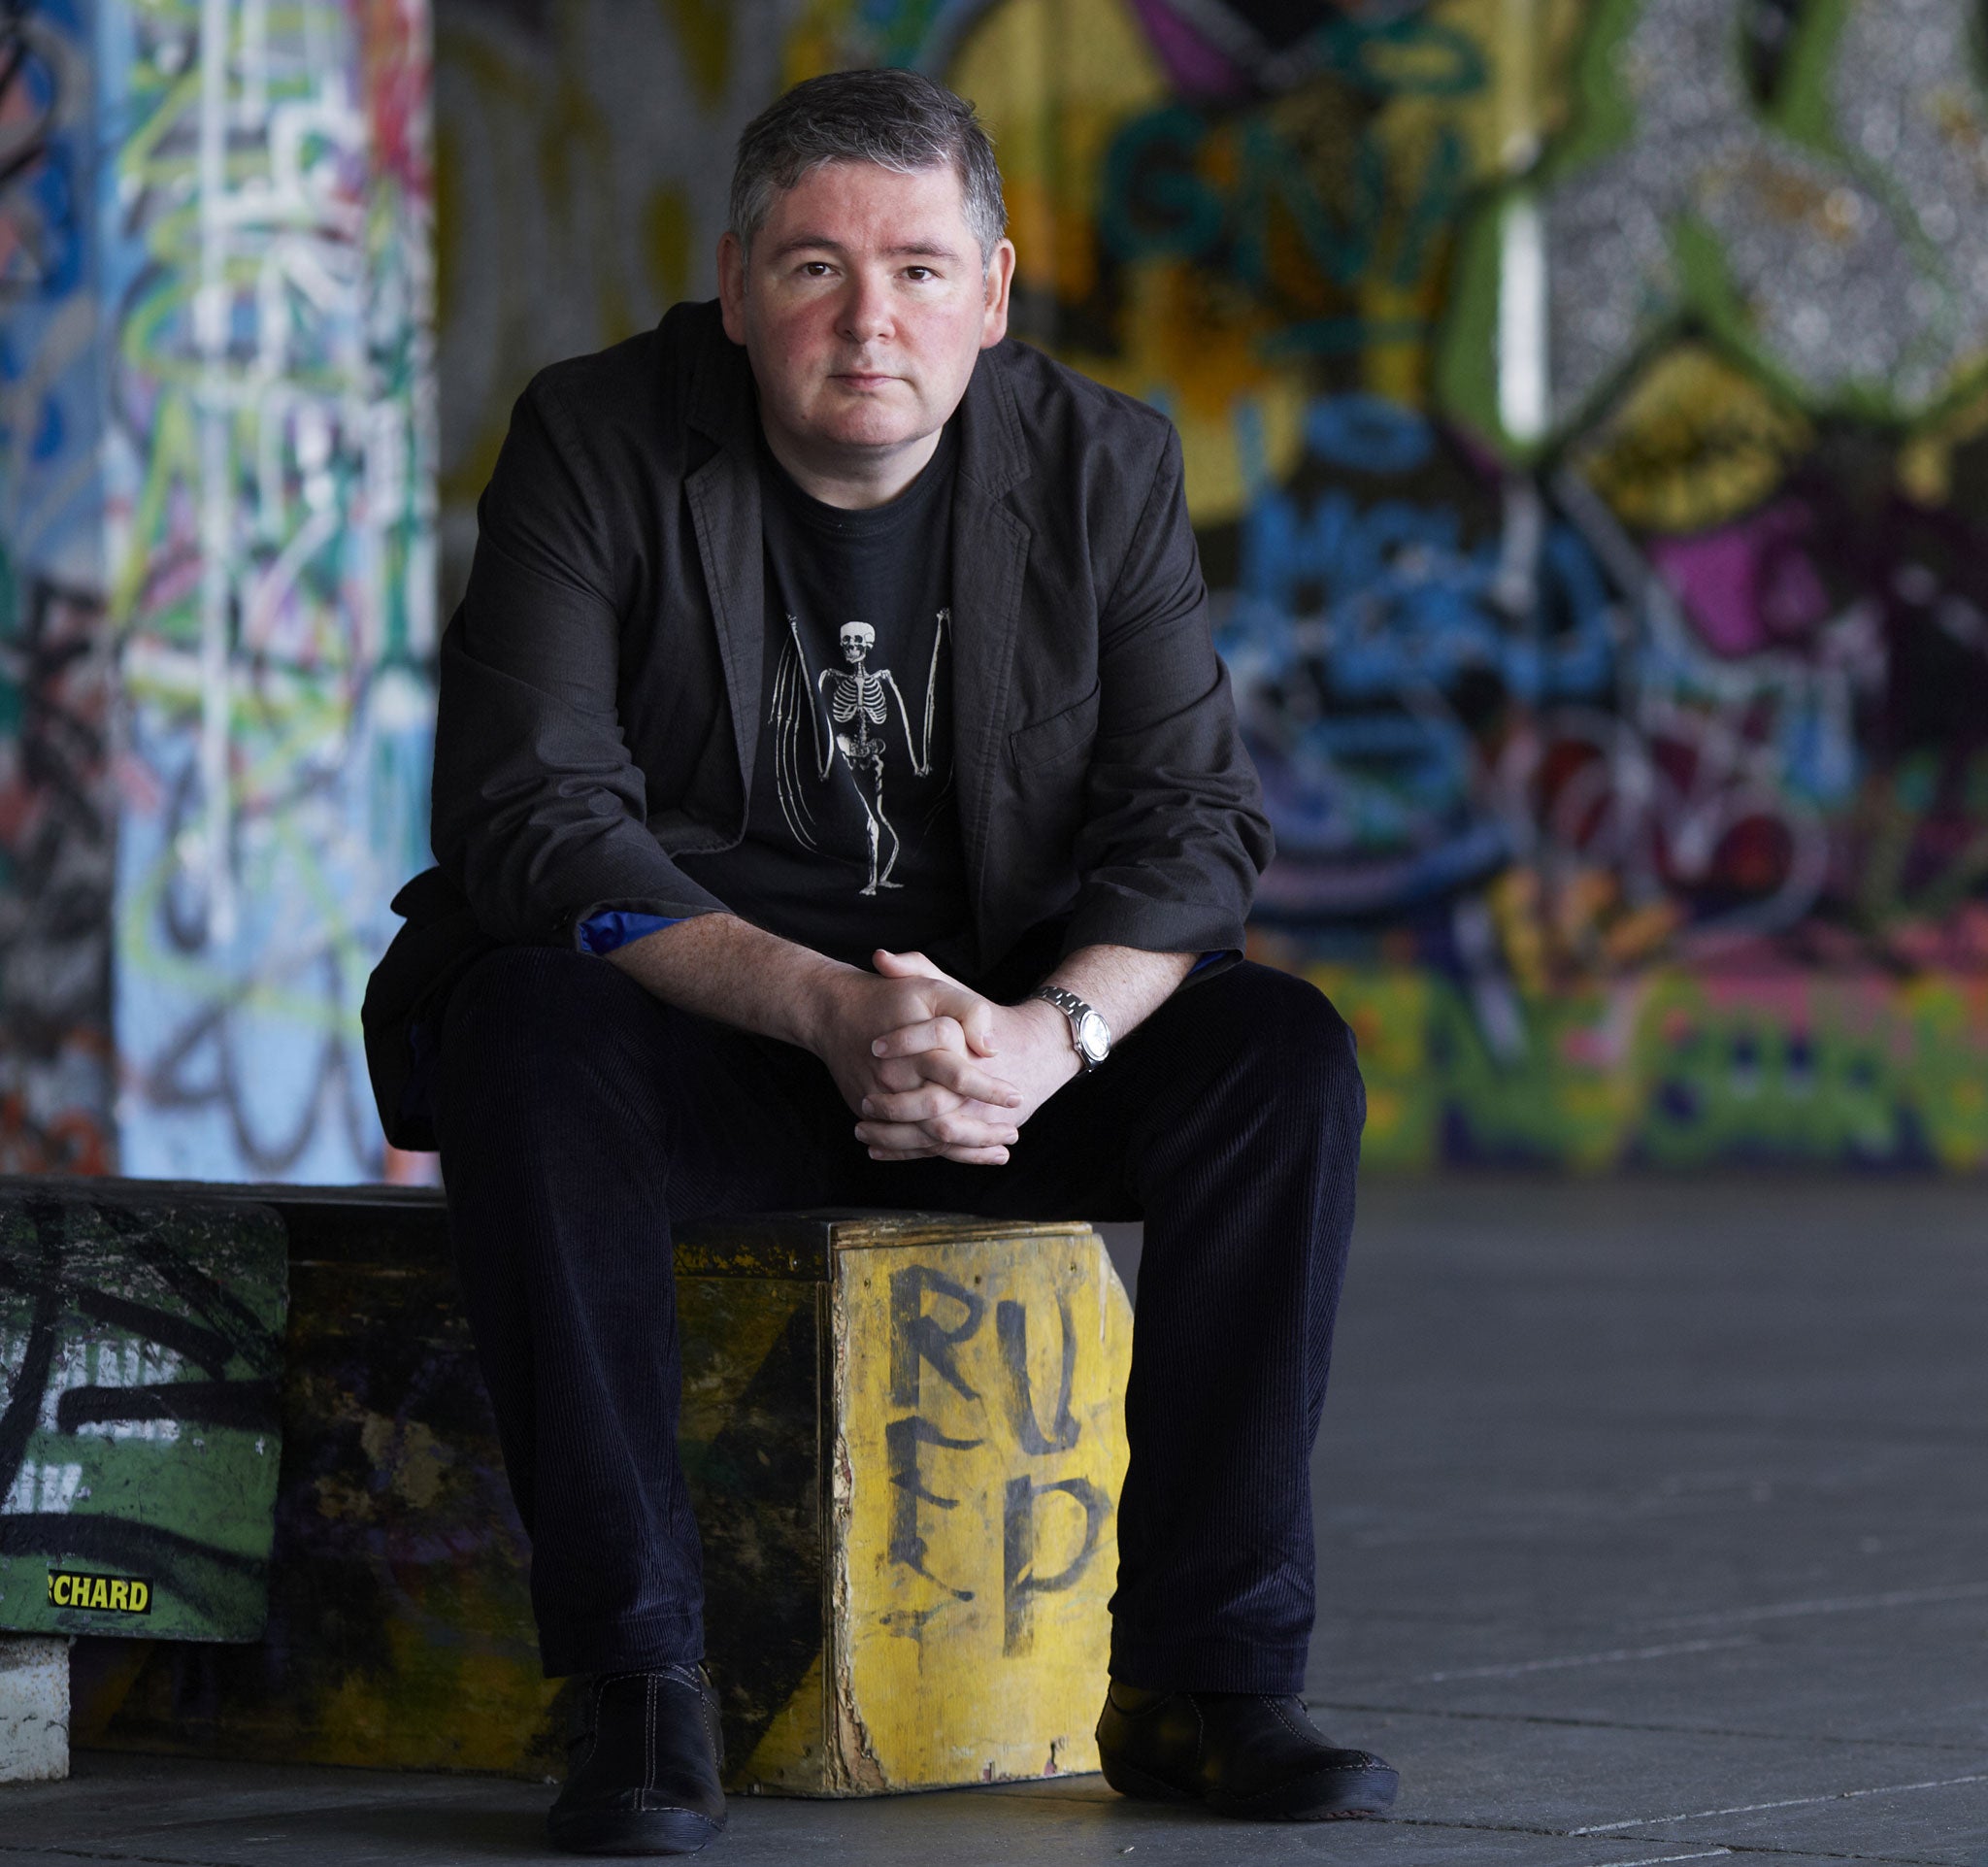 Author Darren Shan on the South Bank